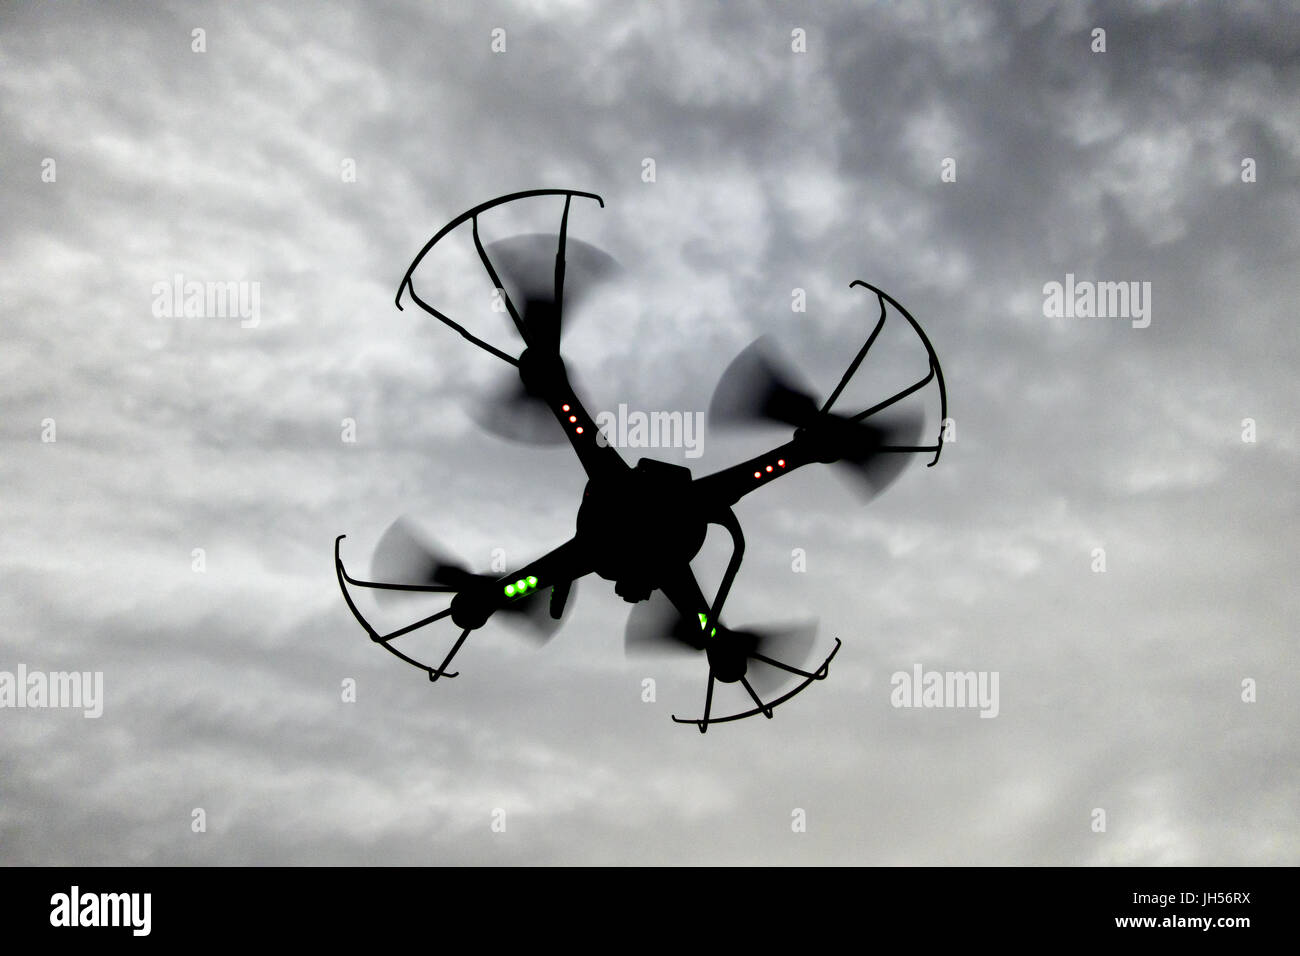 myg endnu engang hastighed A drone flying in dark clouds with red and green lights. Concept of  diffucult times Stock Photo - Alamy